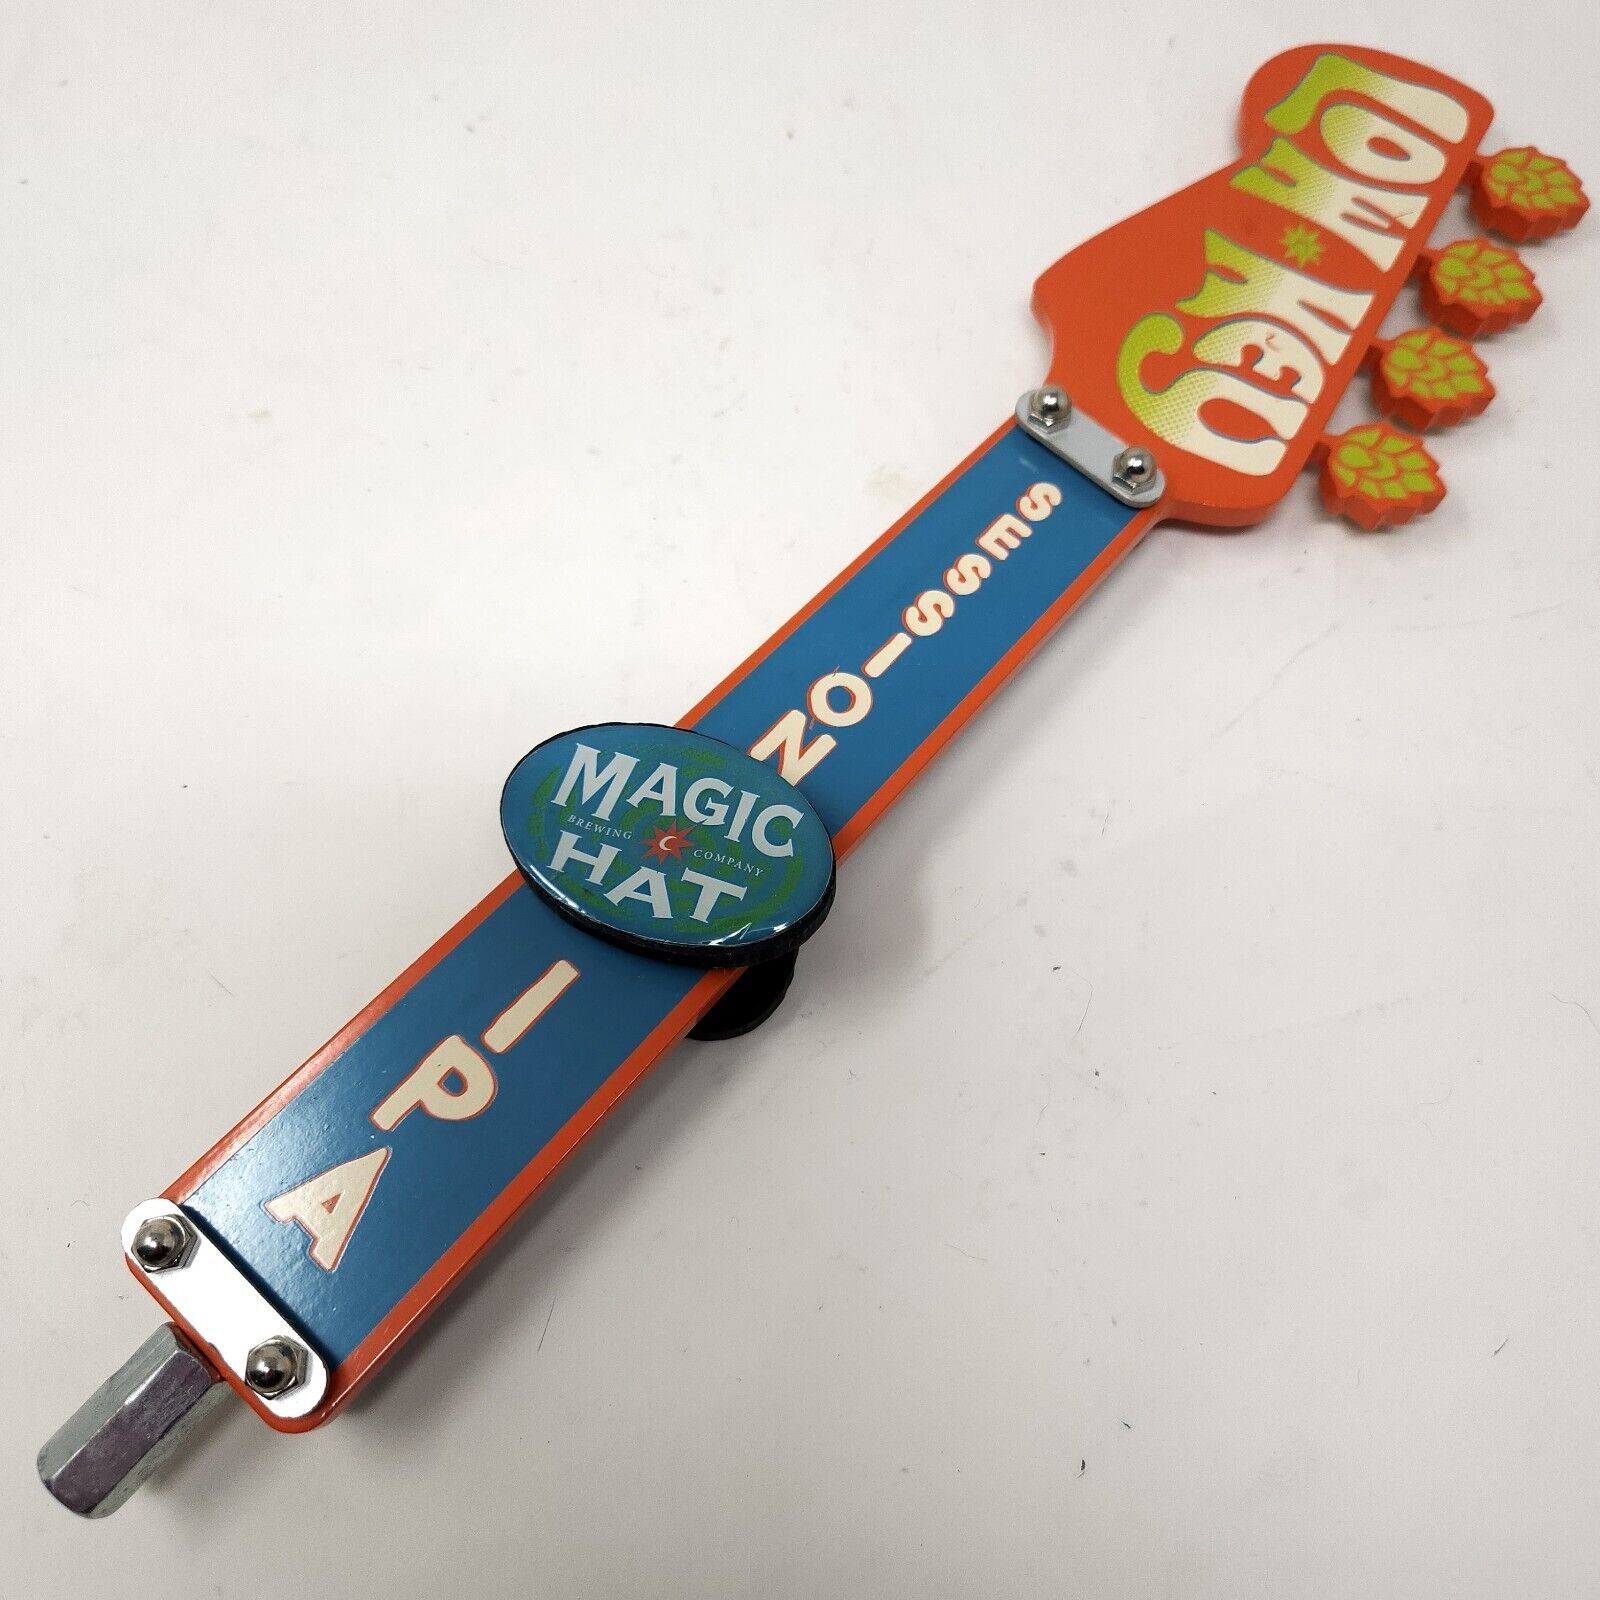 VTG Very Cool Guitar Low Key Session IPA Magic Hat Beer Tap Handle Vermont 3D